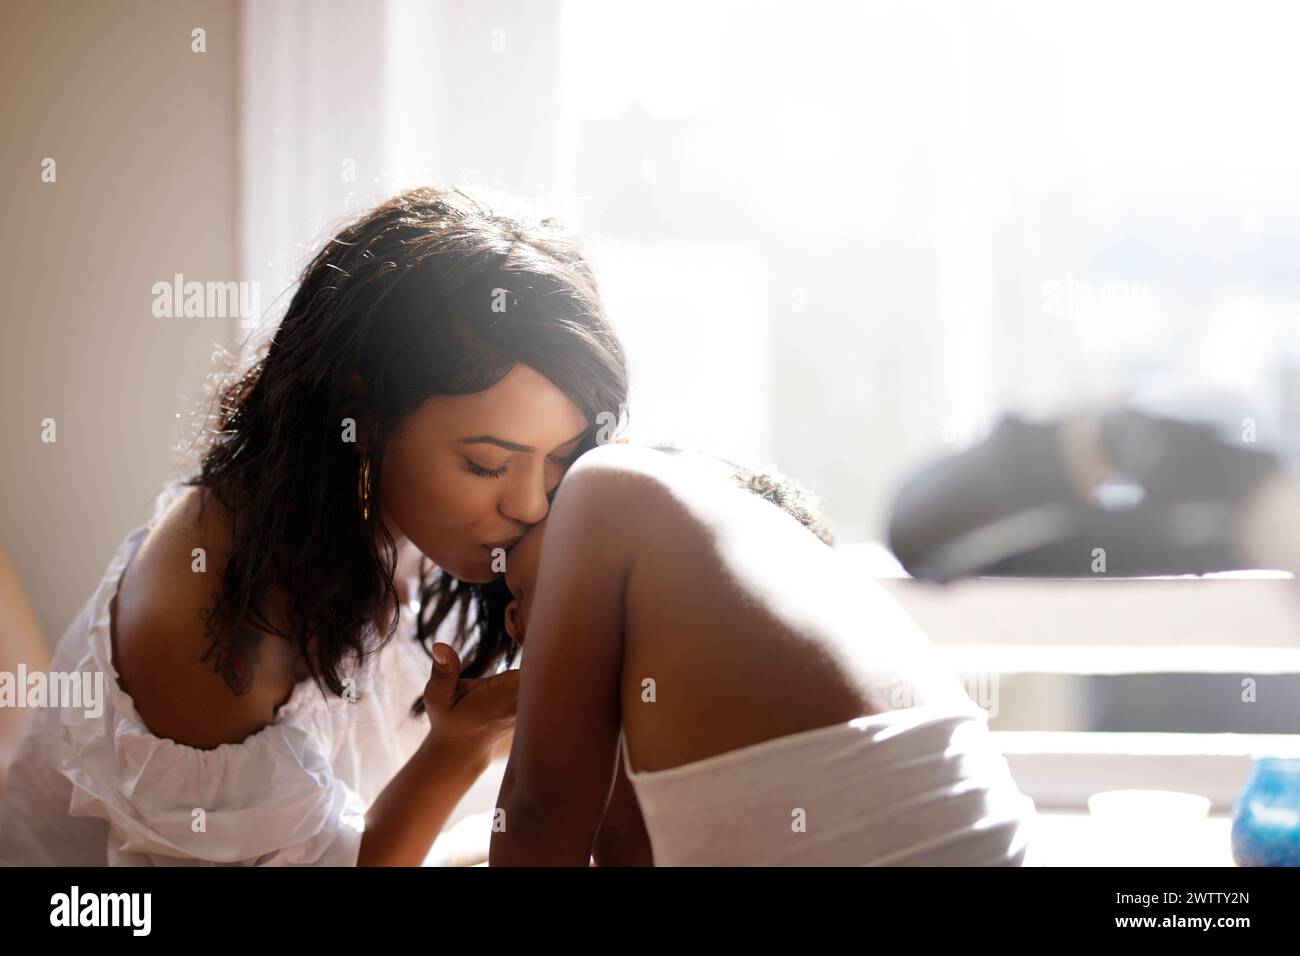 Woman sitting by the window in contemplation Stock Photo